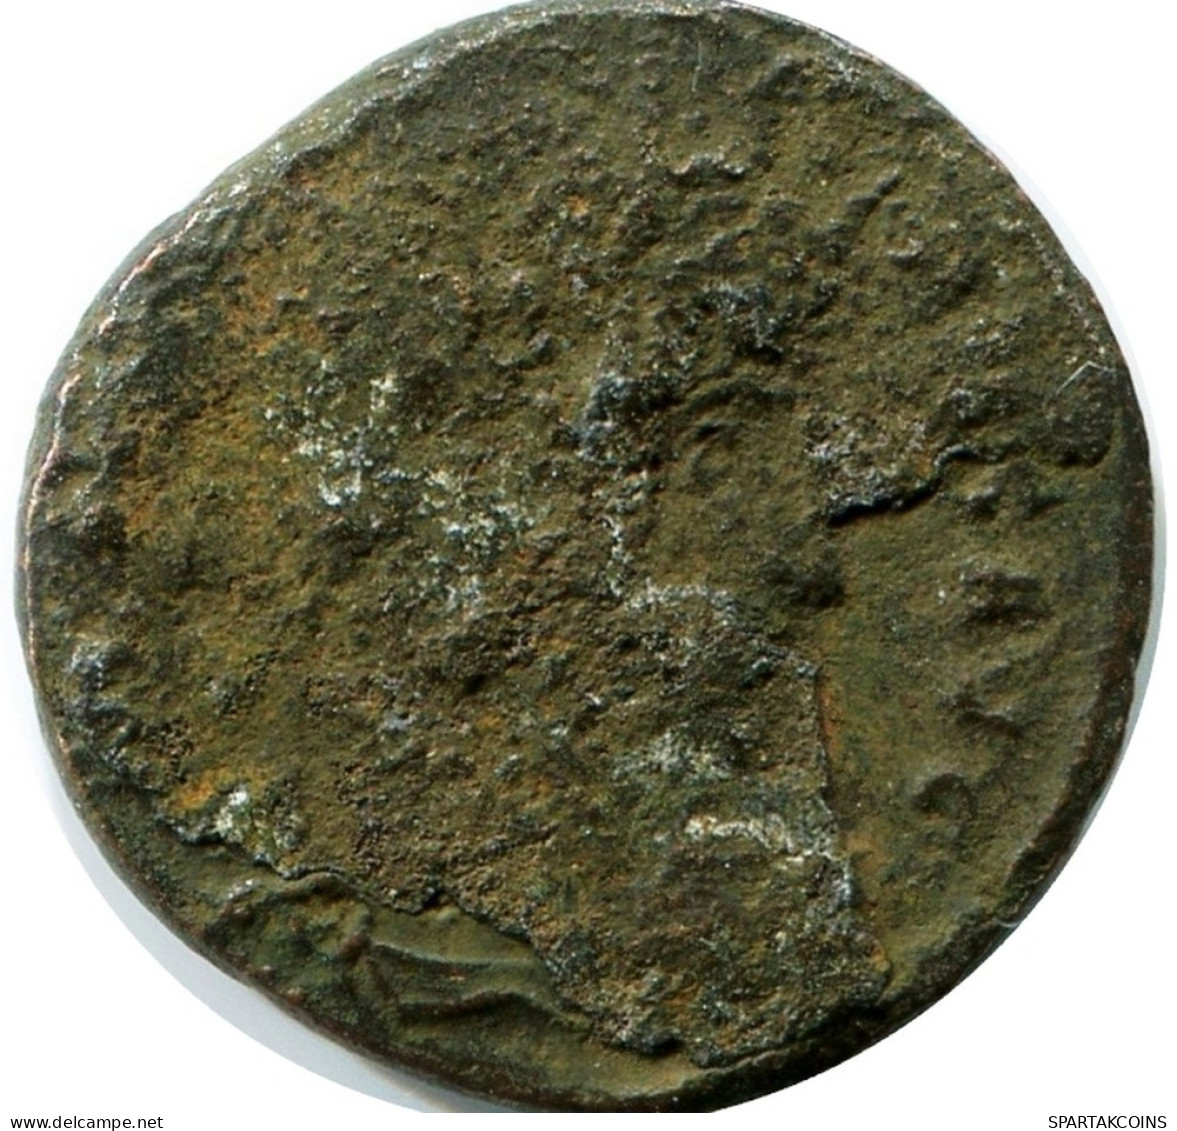 ROMAN Pièce MINTED IN ANTIOCH FROM THE ROYAL ONTARIO MUSEUM #ANC11305.14.F.A - El Imperio Christiano (307 / 363)